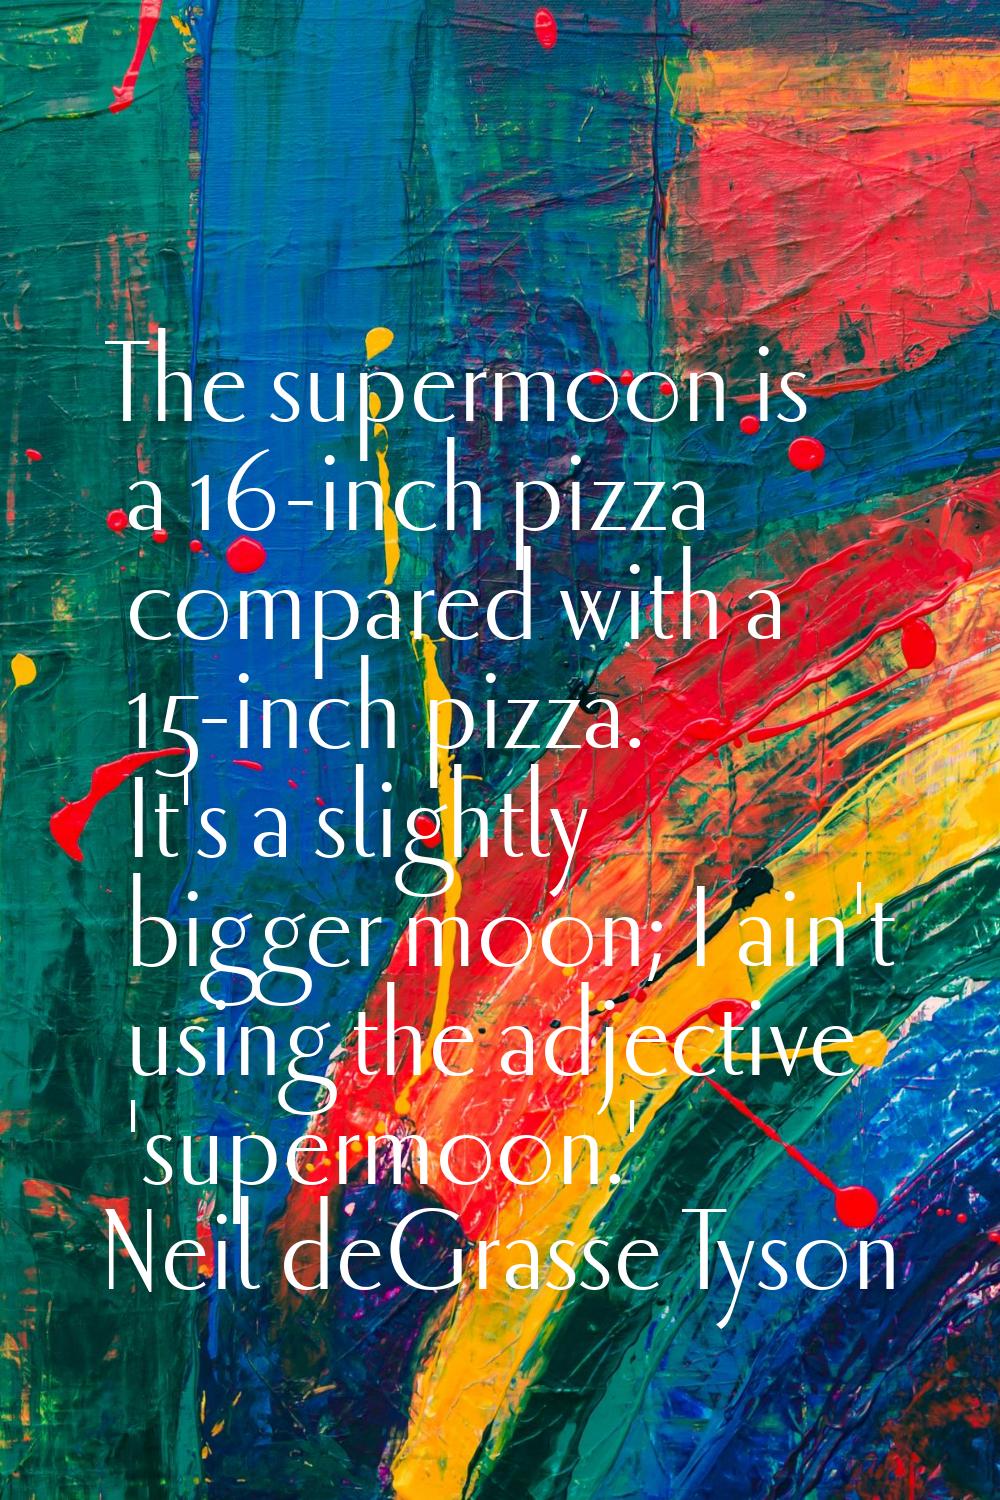 The supermoon is a 16-inch pizza compared with a 15-inch pizza. It's a slightly bigger moon; I ain'